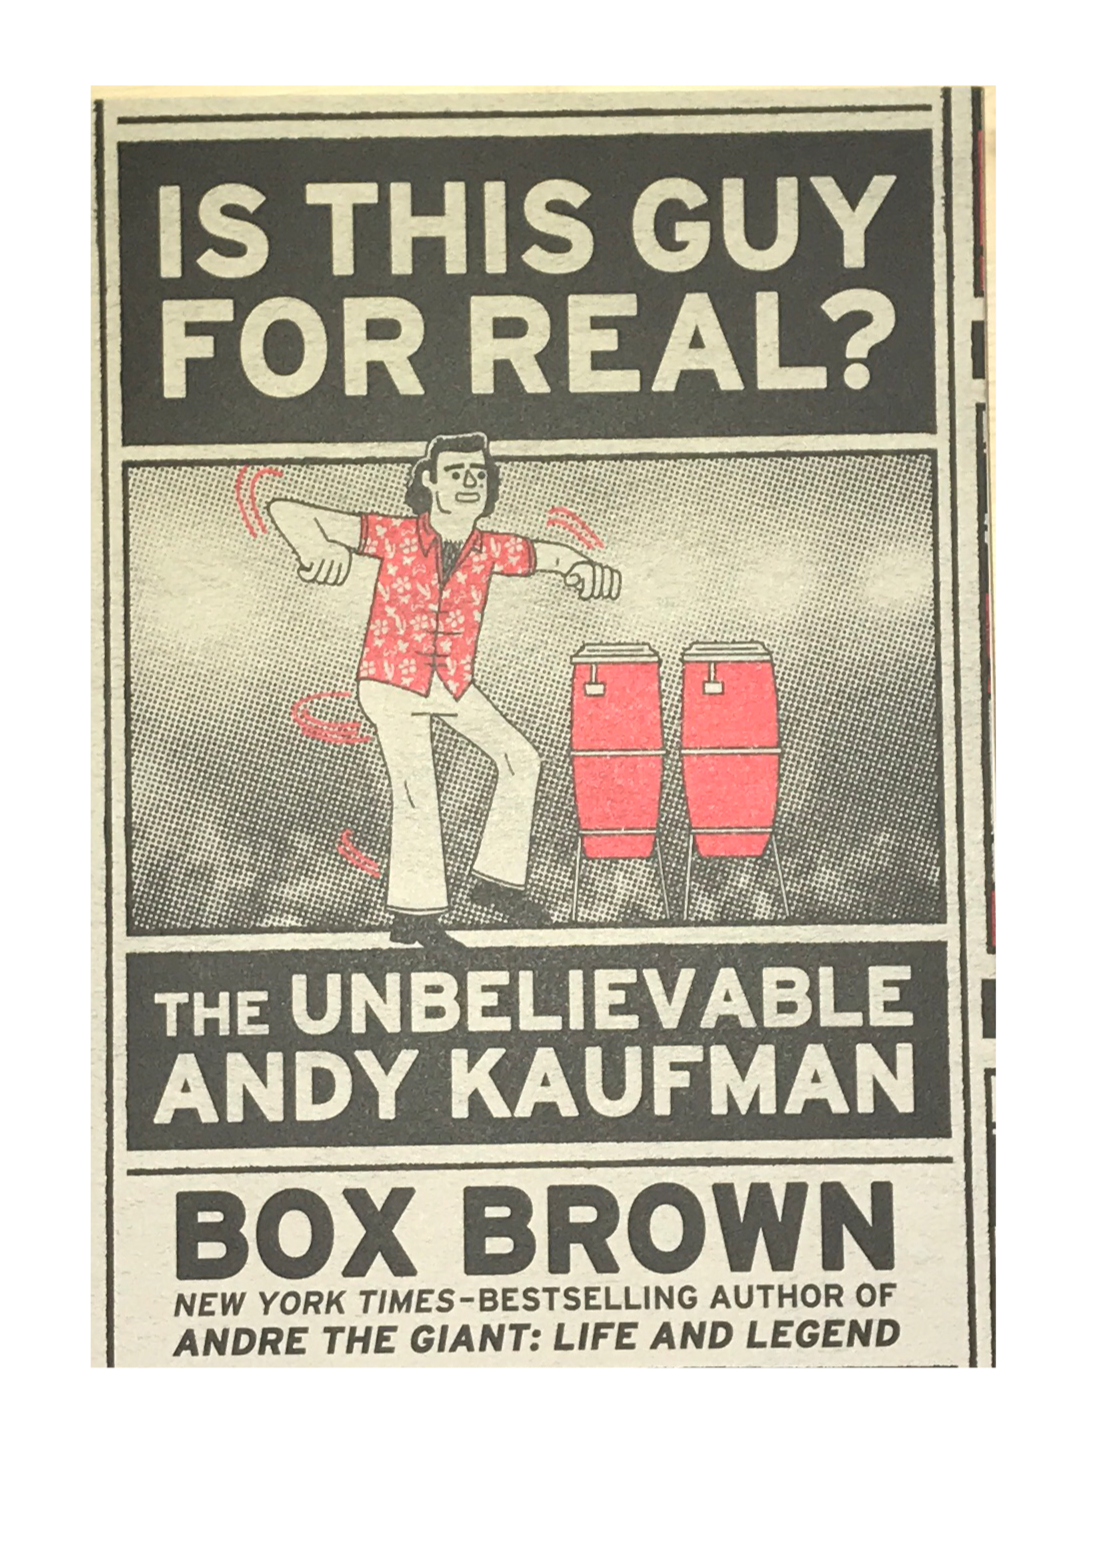 Is This Guy For Real? The Unbelievable Andy Kaufman